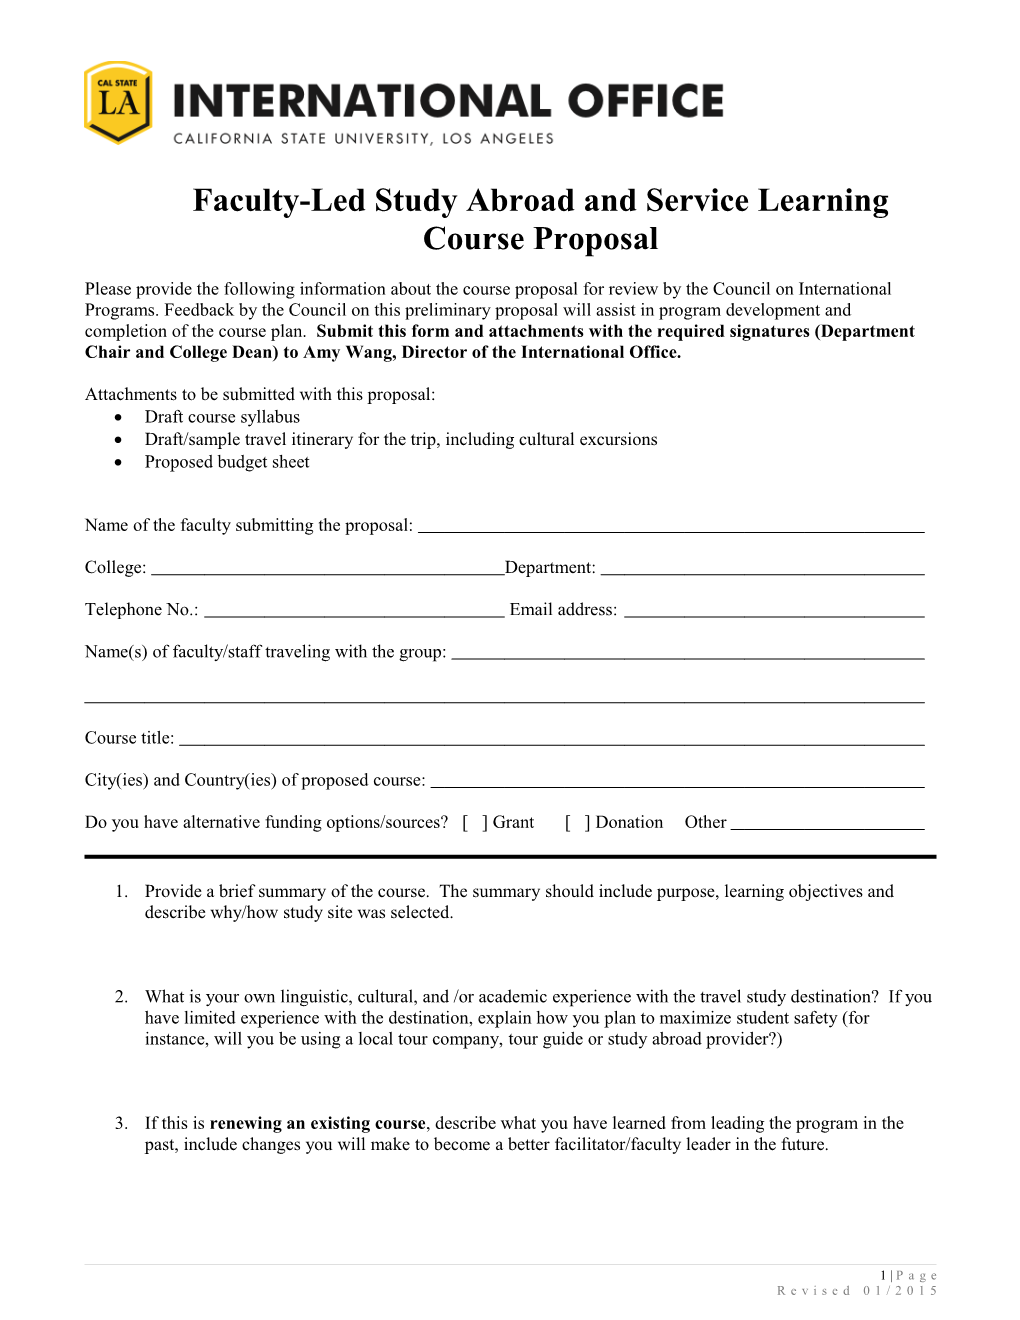 Faculty-Led Study Abroad and Service Learning